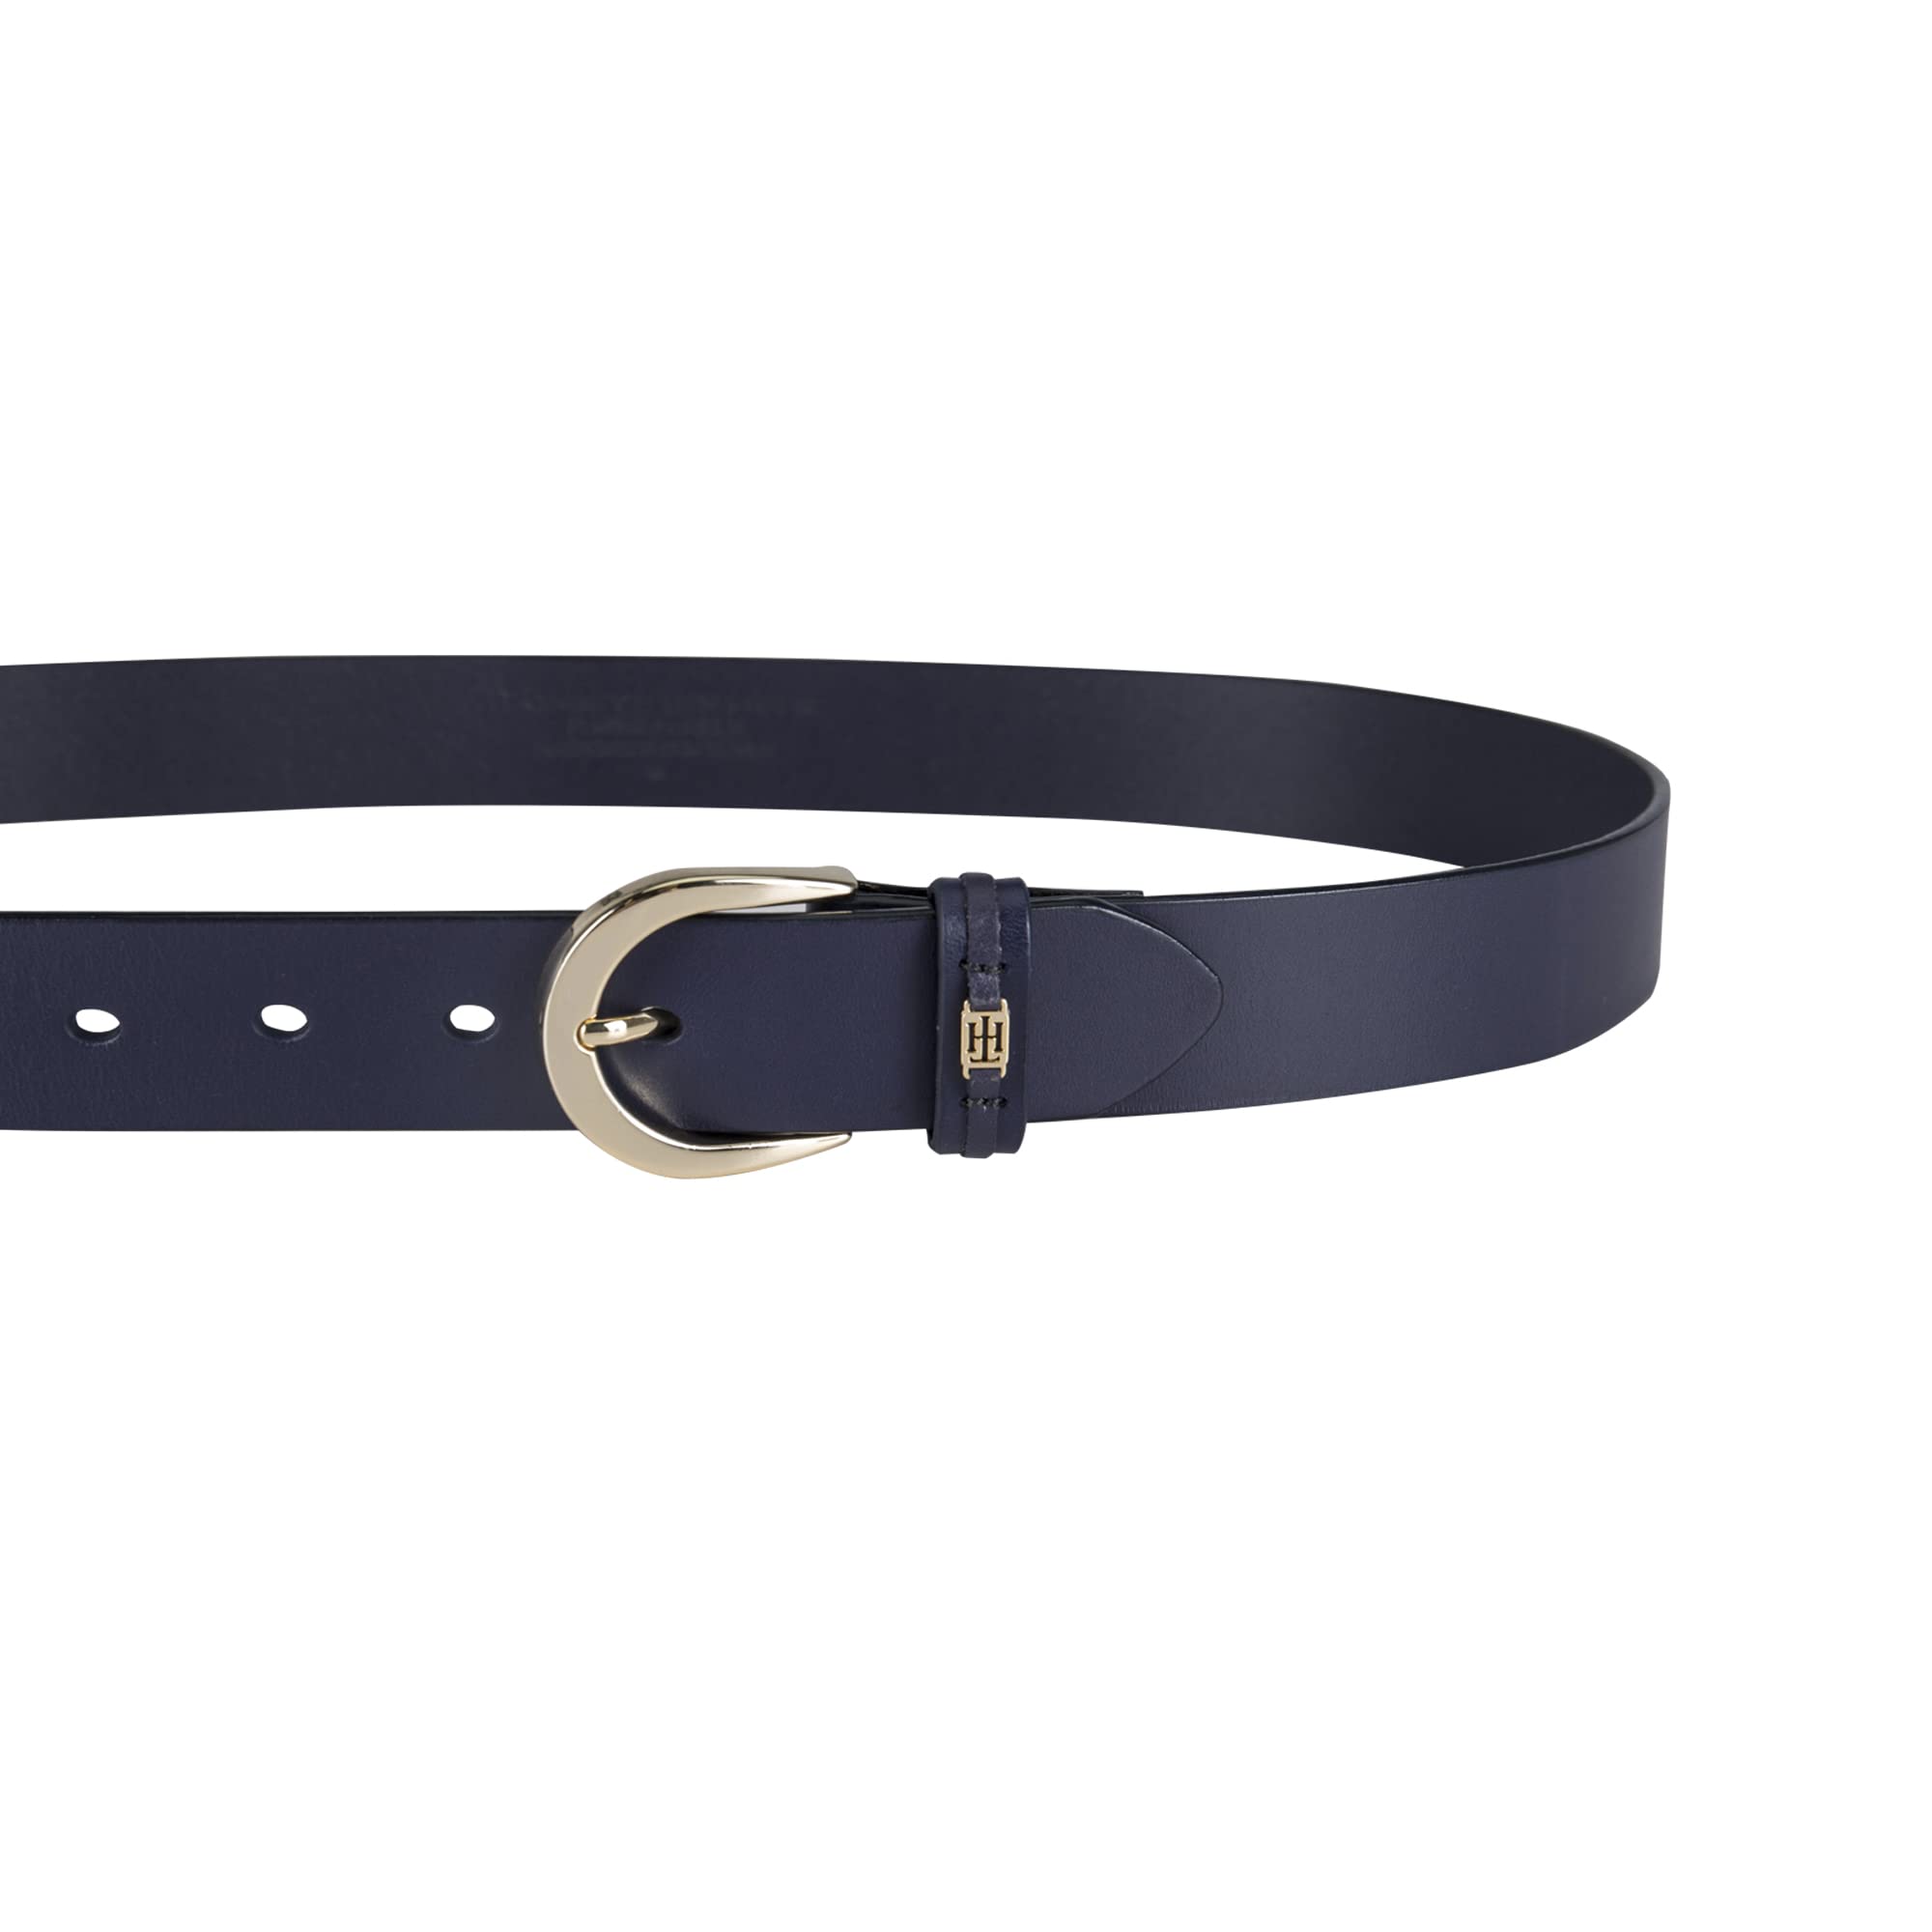 Tommy Hilfiger Women's Fashion Leather Belt for Jeans, Trousers and Dresses